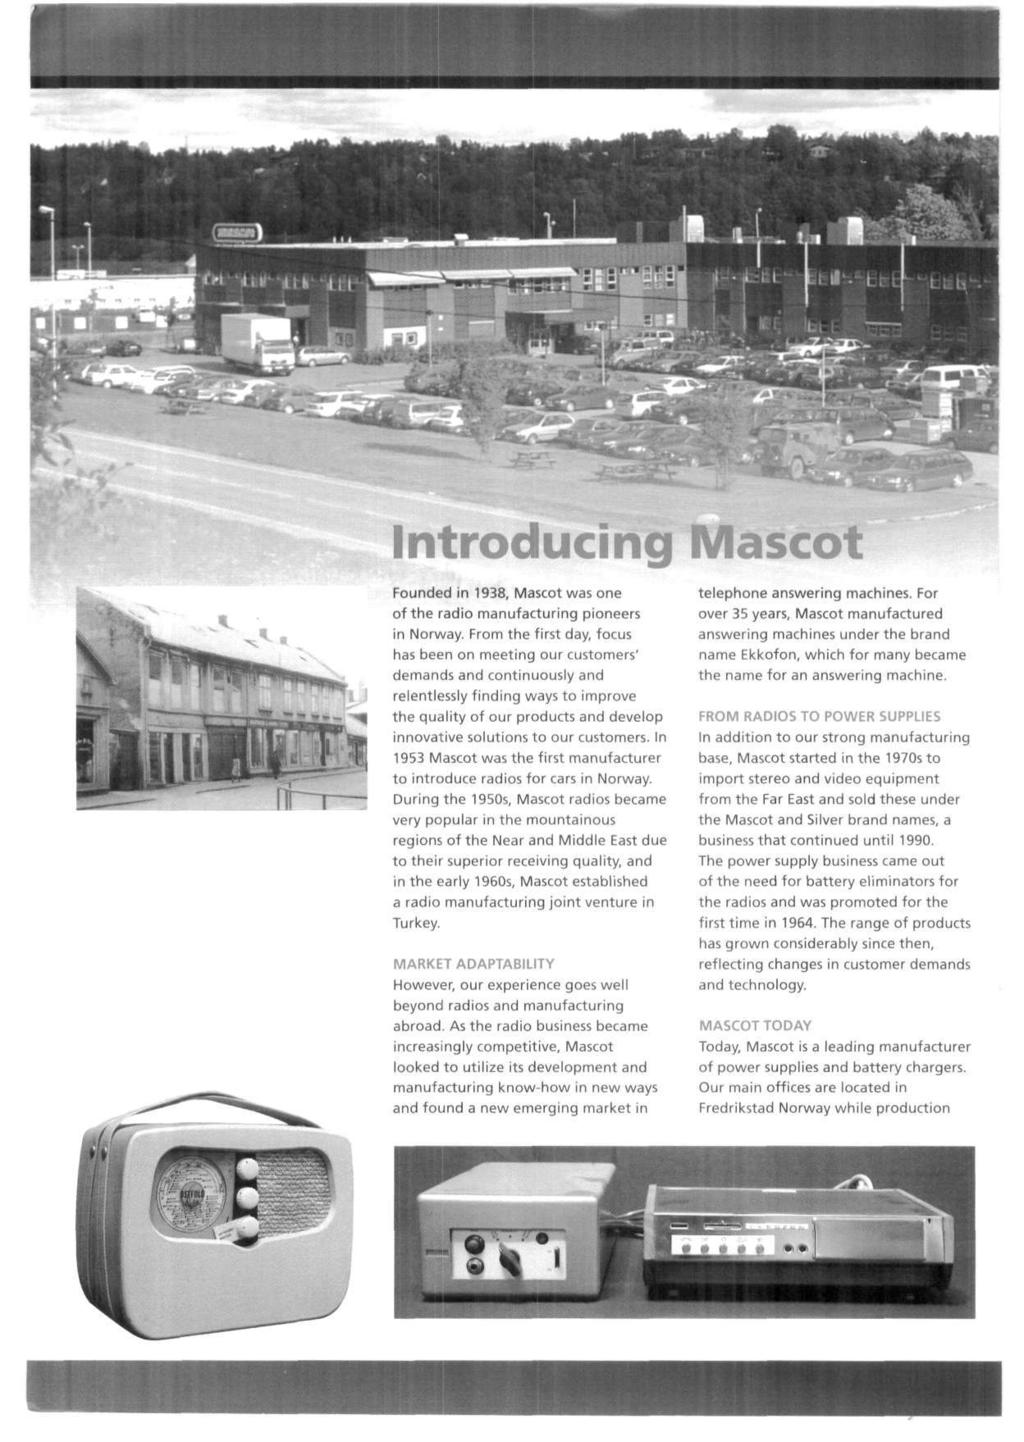 Introducing Mascot Founded in 1938, Mascot was one of the radio manufacturing pioneers in Norway.